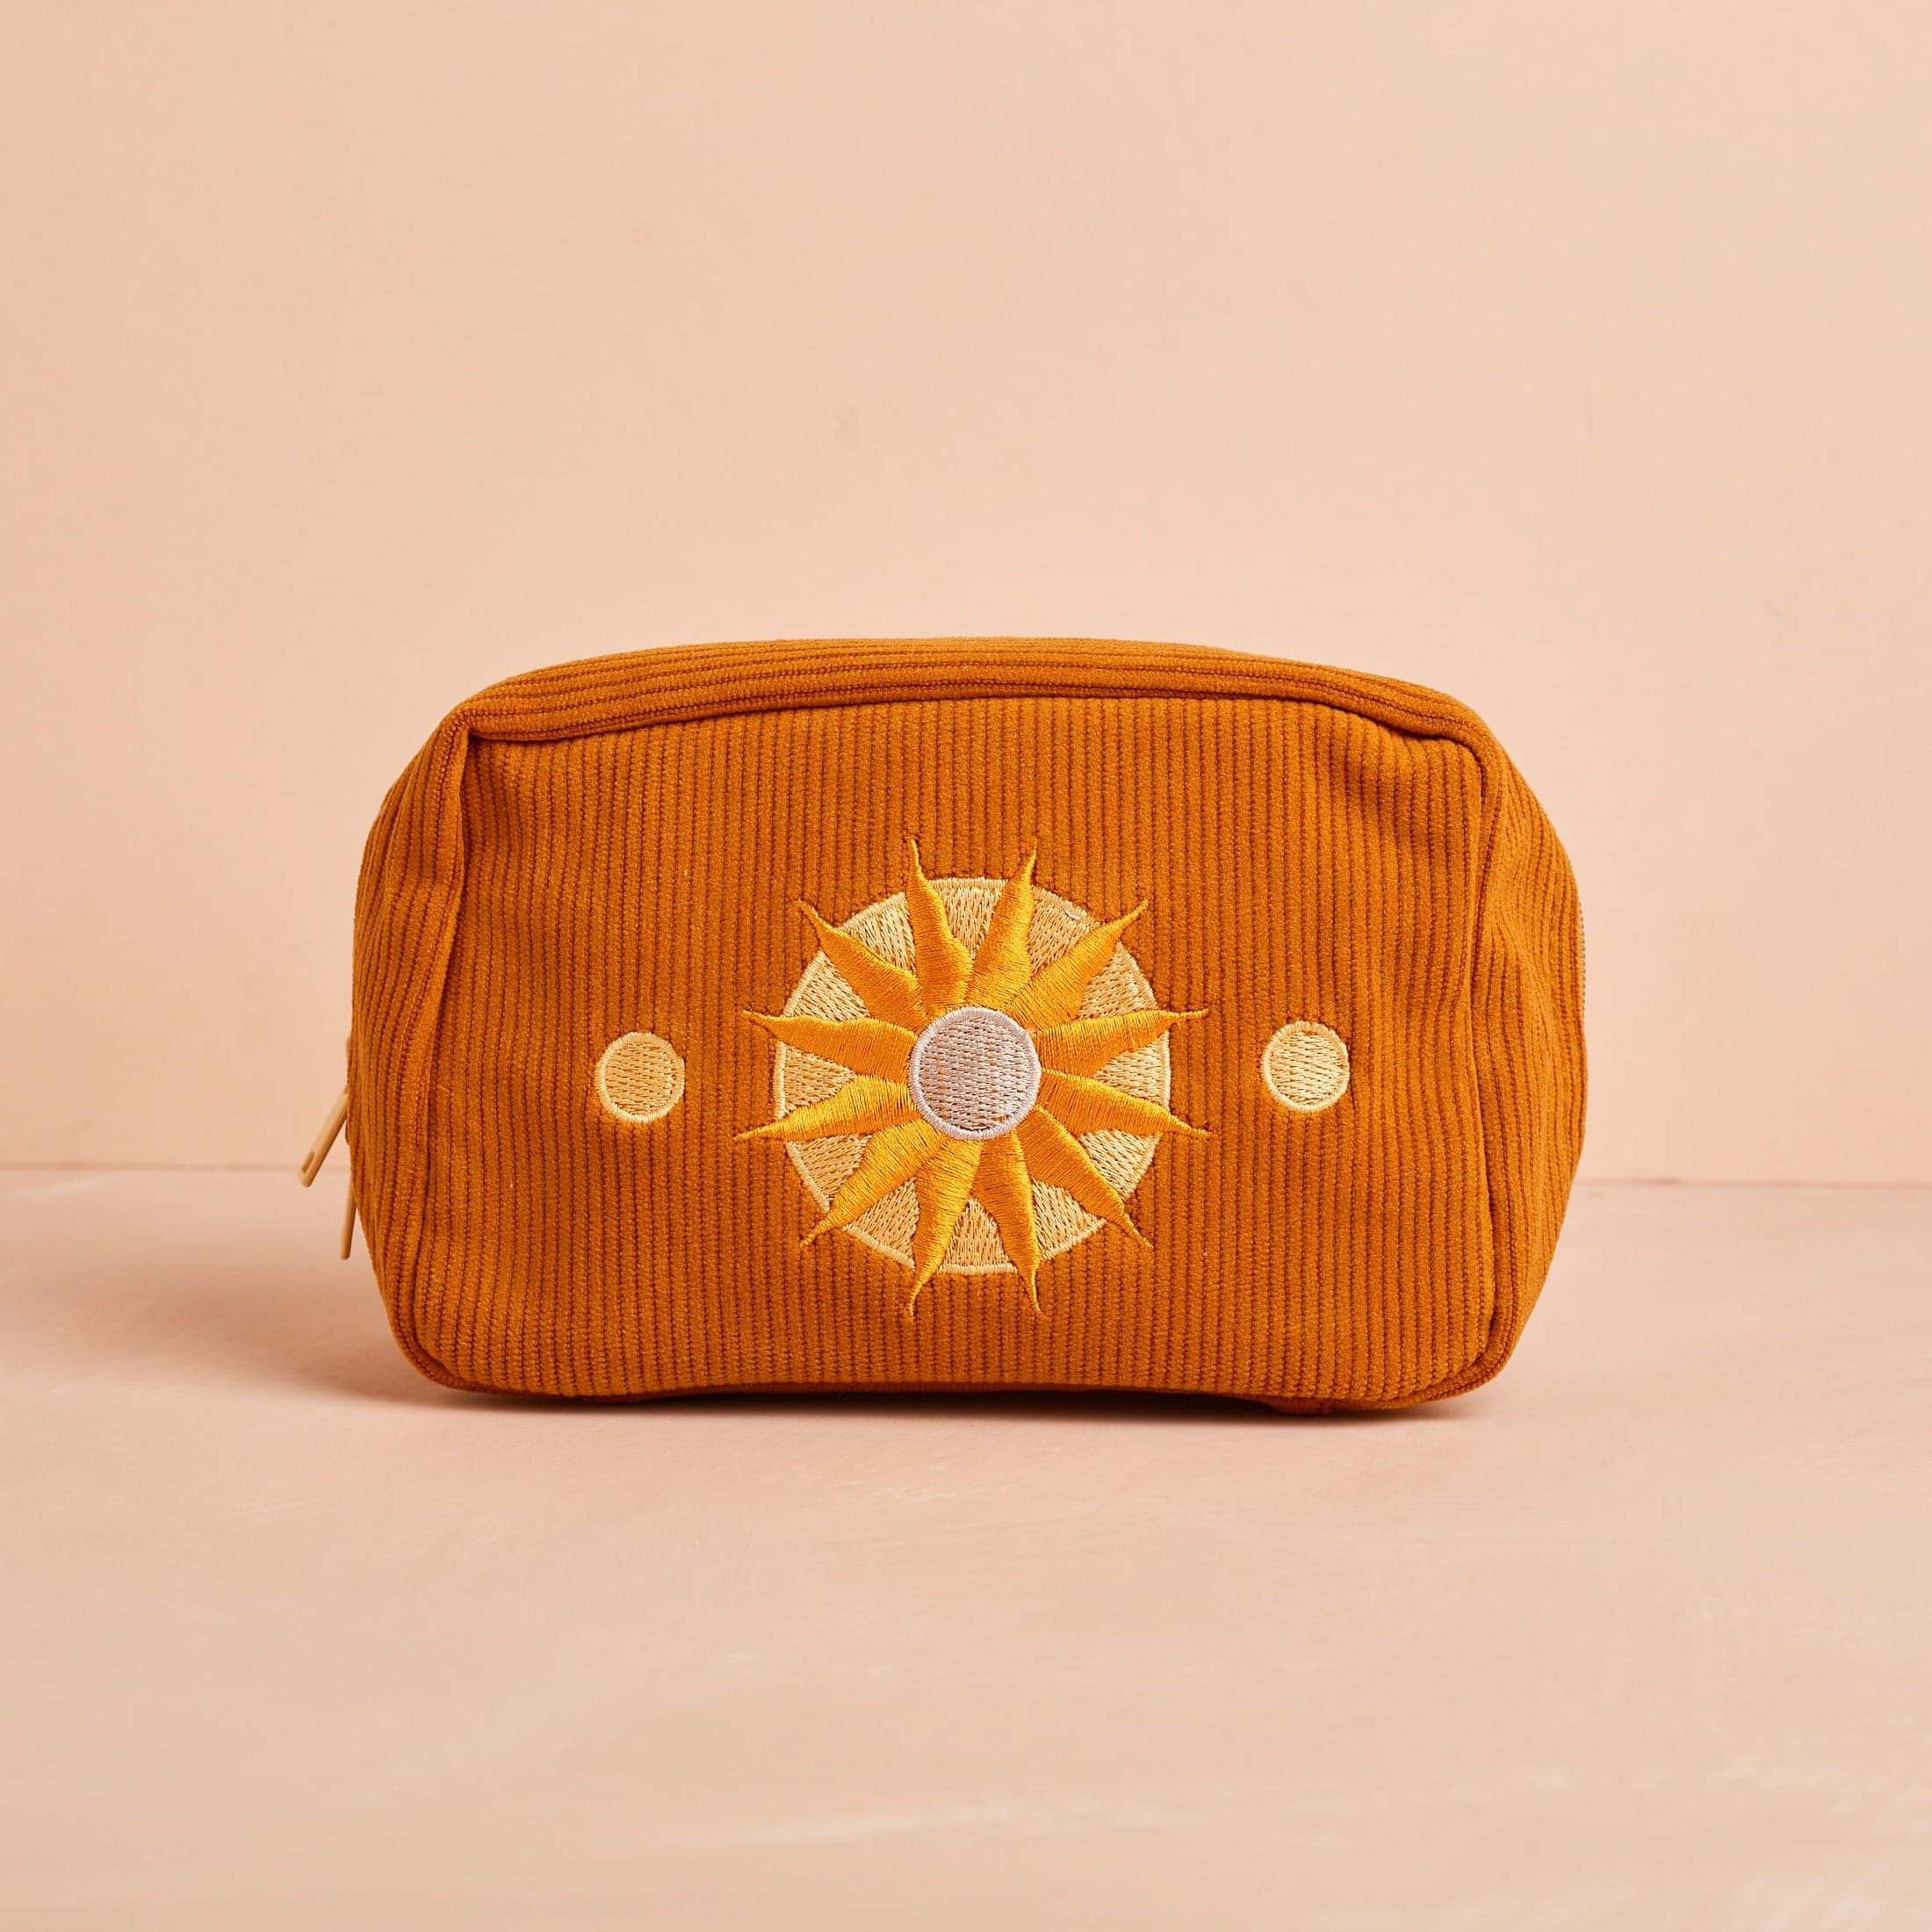 A burnt orange corduroy makeup bag with a sun design and two circles beside it.